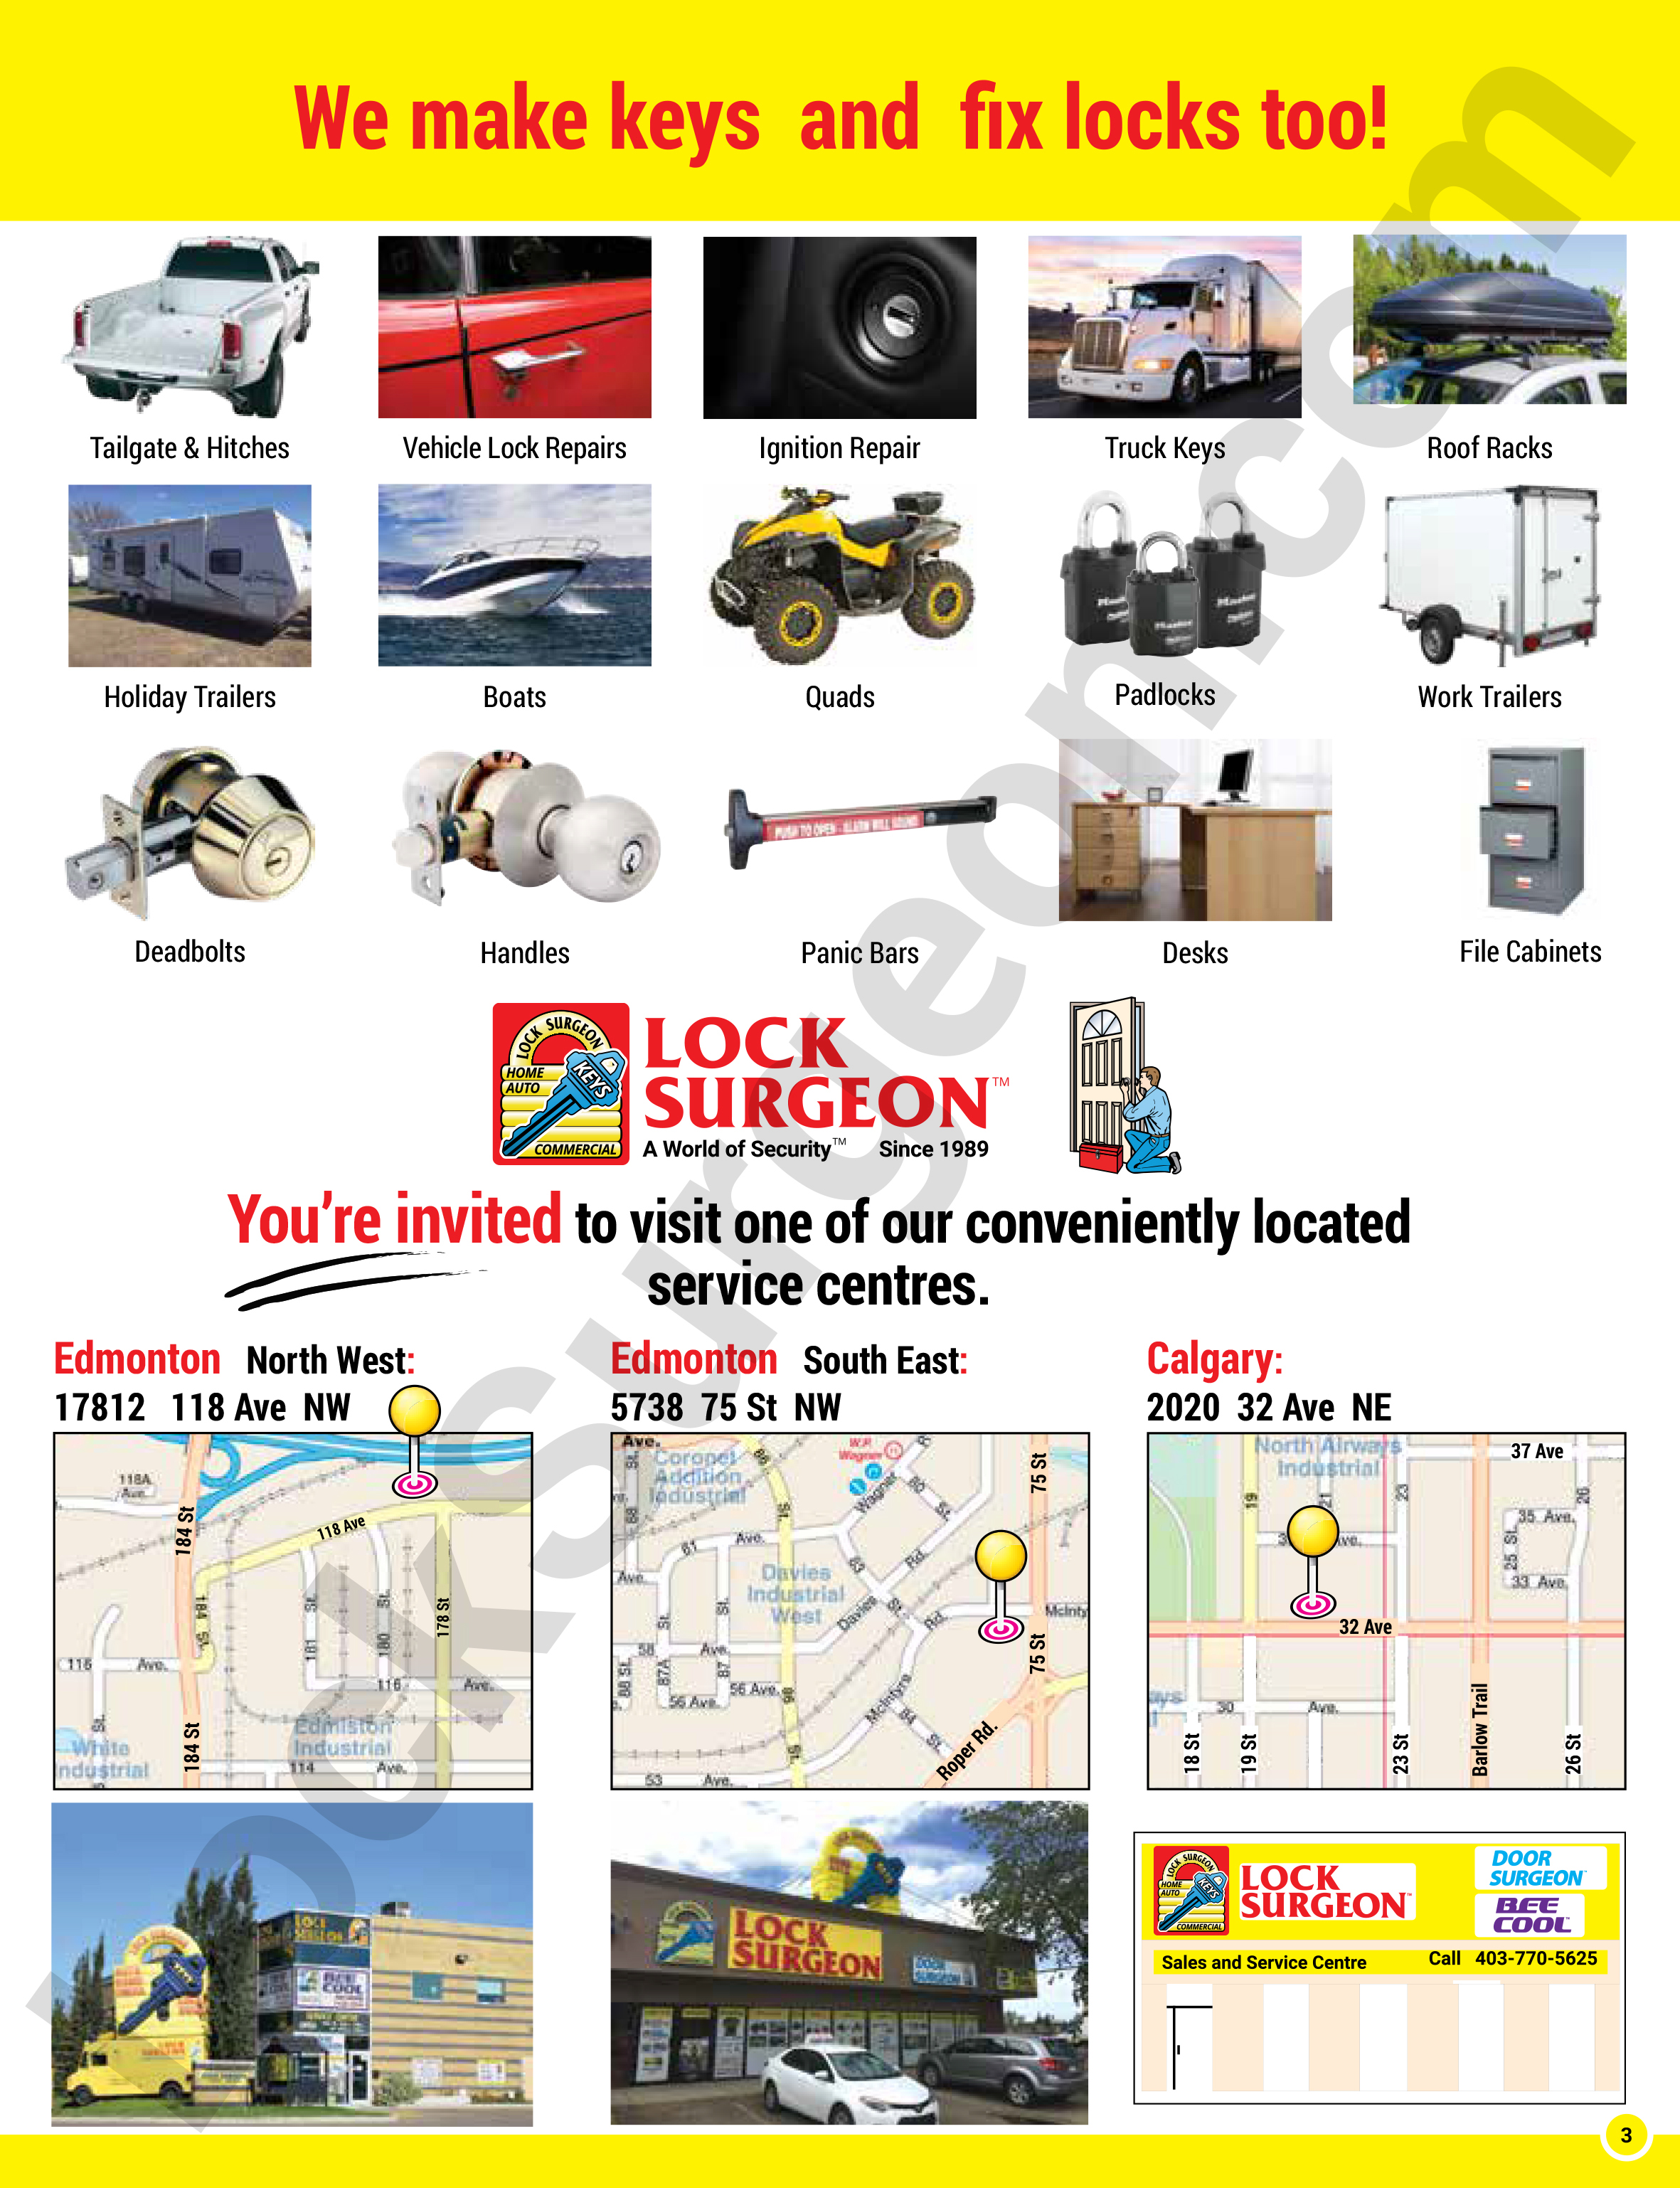 Truck and Canopy locks, car and truck lock repair, Toolie cover keys, camper, motorhome and fifth wheel locks and keys, motorbike and boat ignition repair, American and Master padlock keys, keys for work trailers, roof racks, replacement keys for desks and file cabinets, You are invited to visit one of our conveniently located Lock Surgeon service centres - Edmonton Northwest 17812-118 Ave NW or Edmonton Southeast 5738-75 St NW